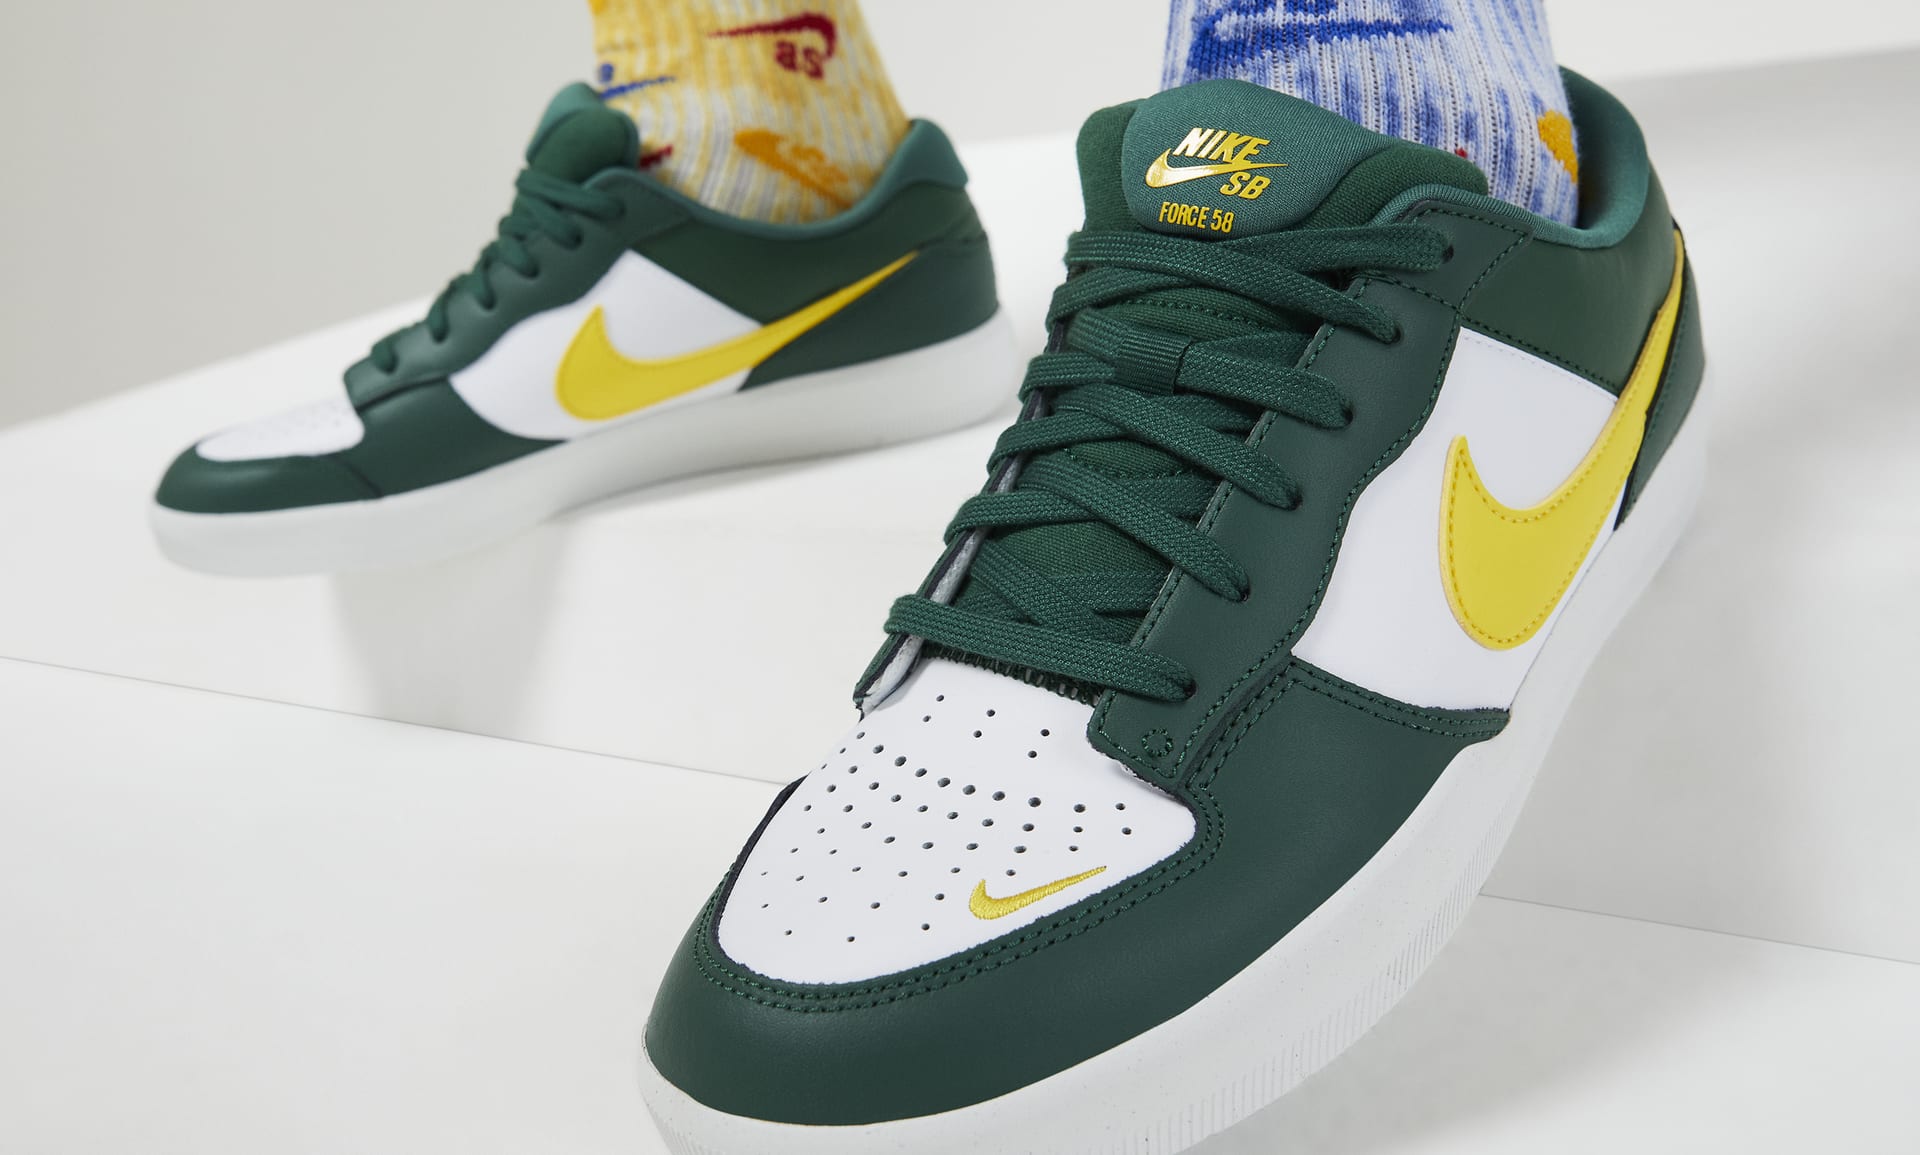 Shocking Nike SB Force 58 Review: You Won’t Believe the Comfort!